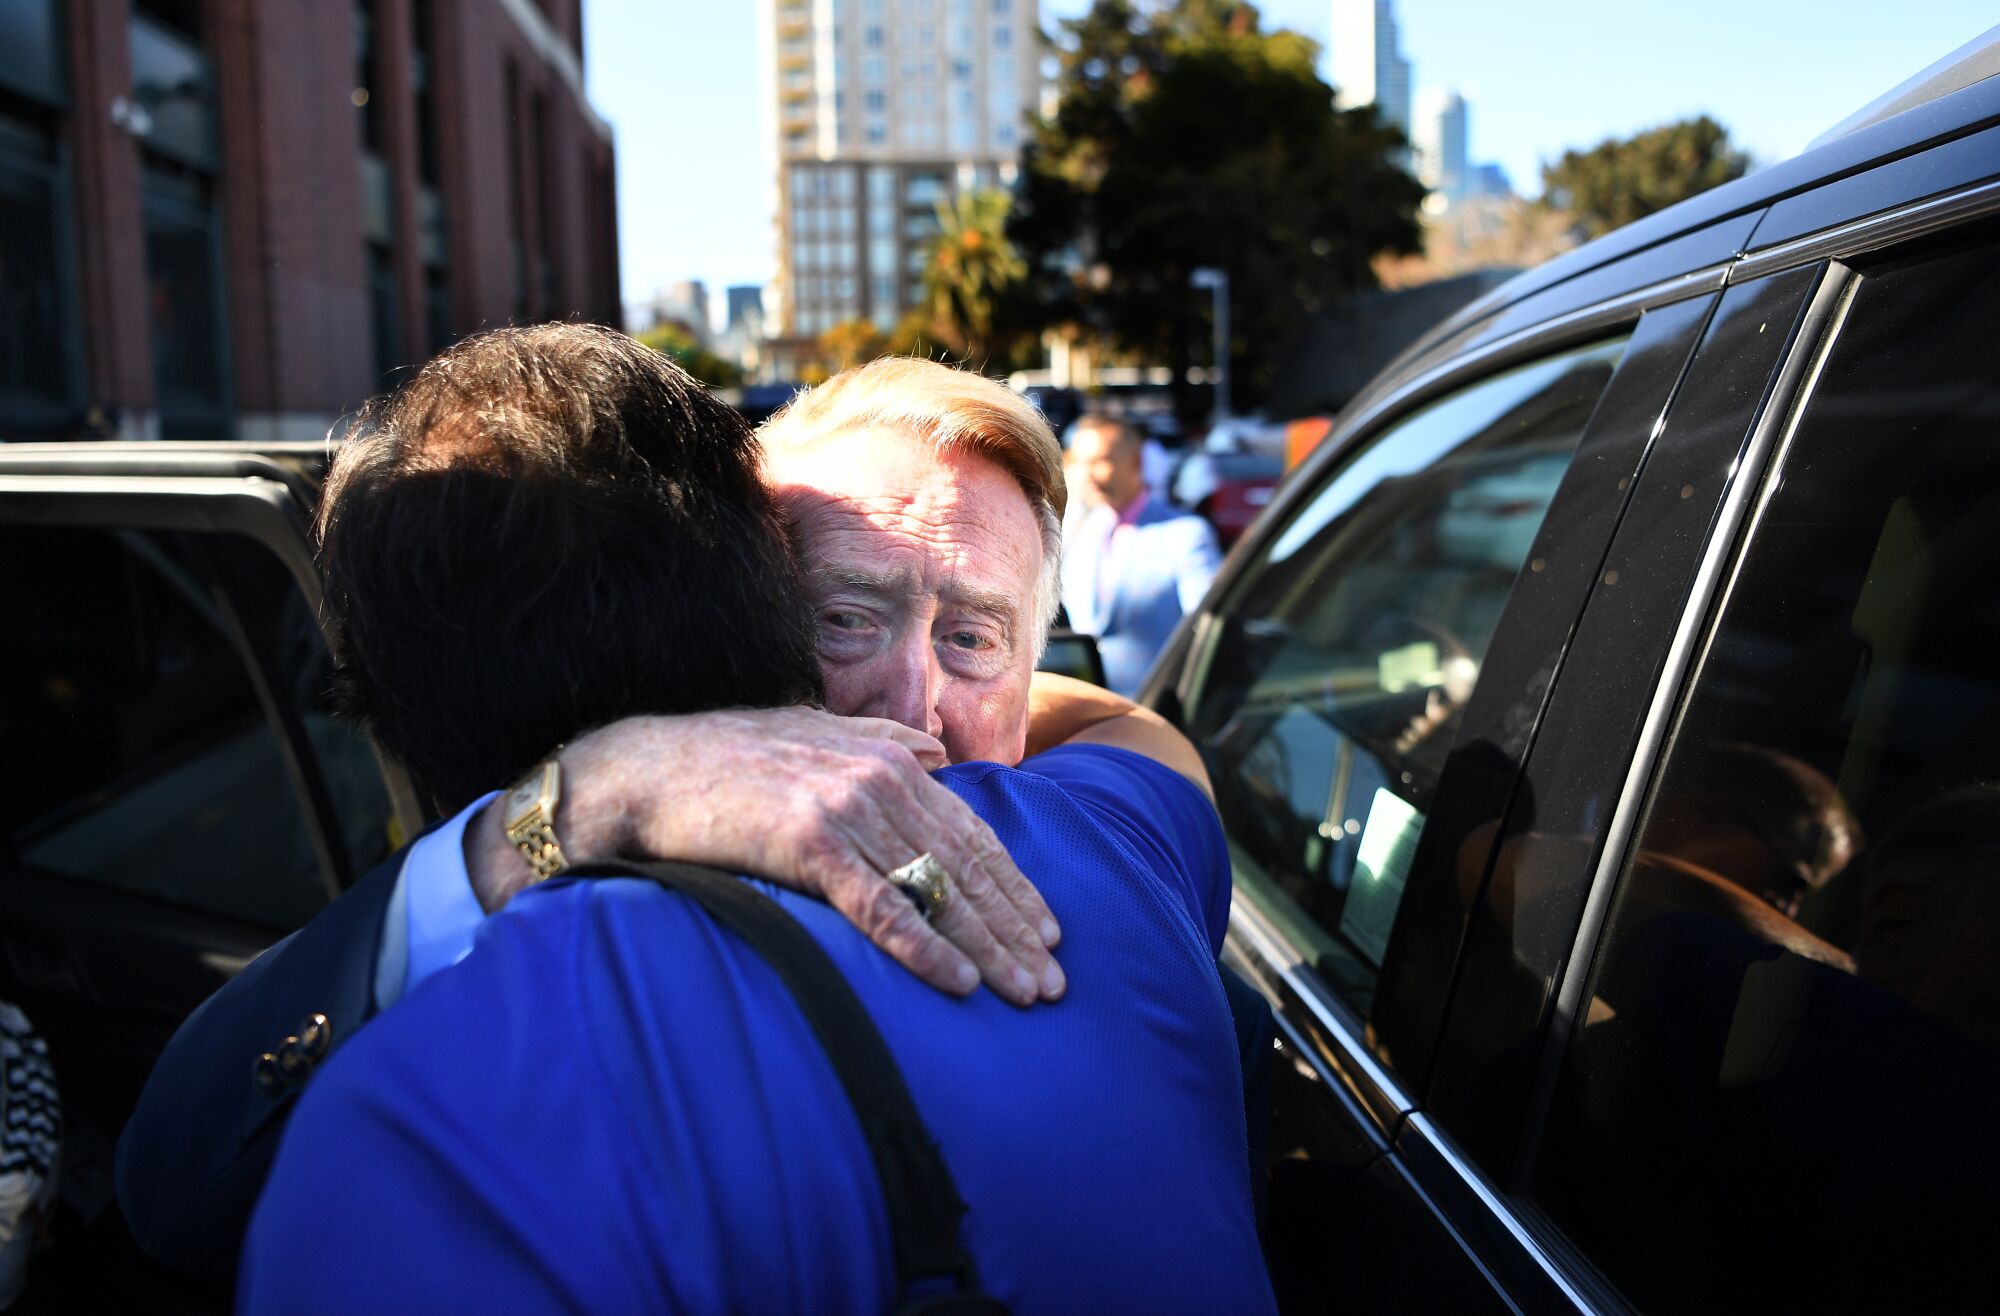 Dodgers broadcast announcer Vin Scully says goodbye to Dodgers team photographer Jon SooHoo